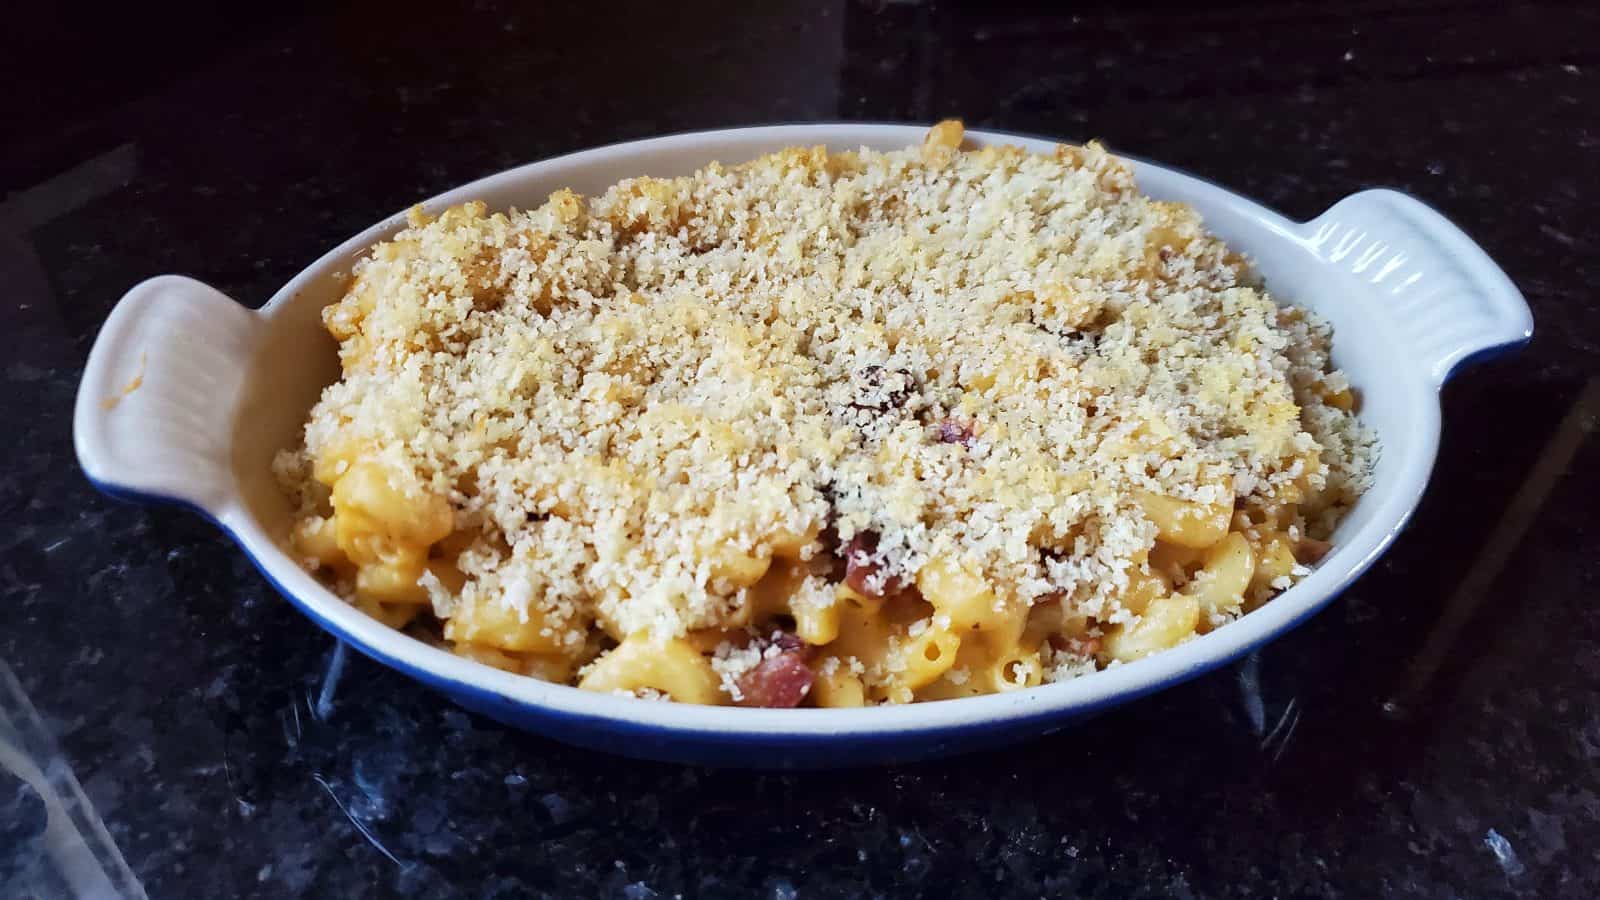 Grown up mac and cheese in a casserole dish.